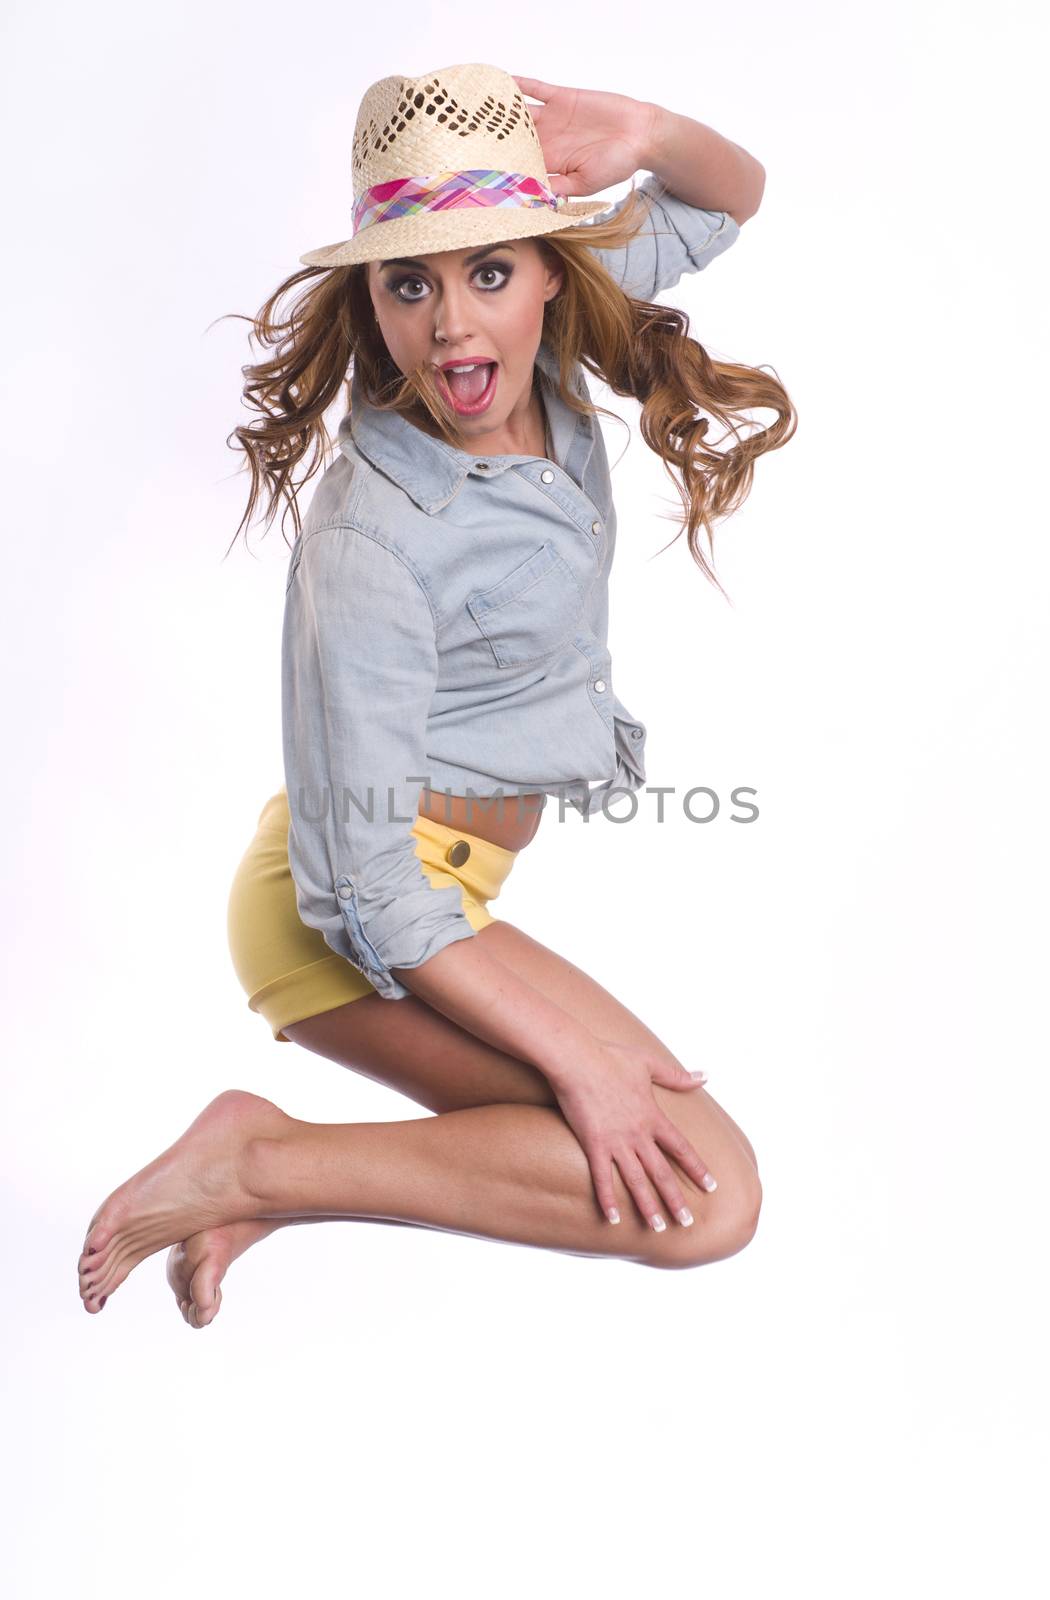 Hipster woman in mid air with excited look